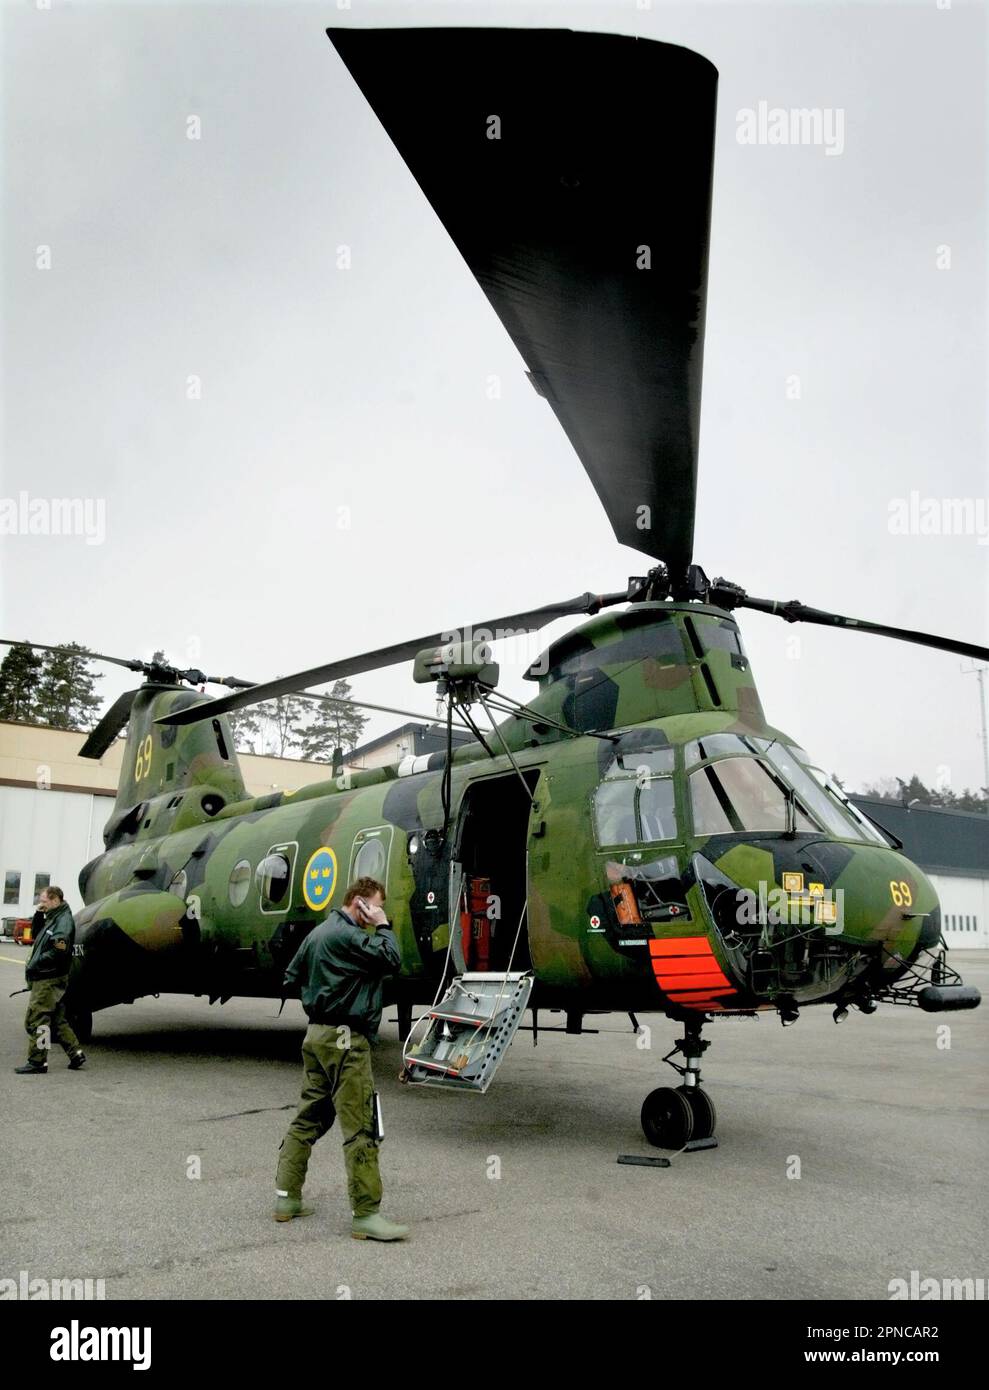 The Swedish Air Force's Helicopter 4, Hkp 4, from the Helicopter Battalion, Berga naval base. Hkp 4 was used in submarine hunts and rescue missions such as the Estonia disaster. Stock Photo